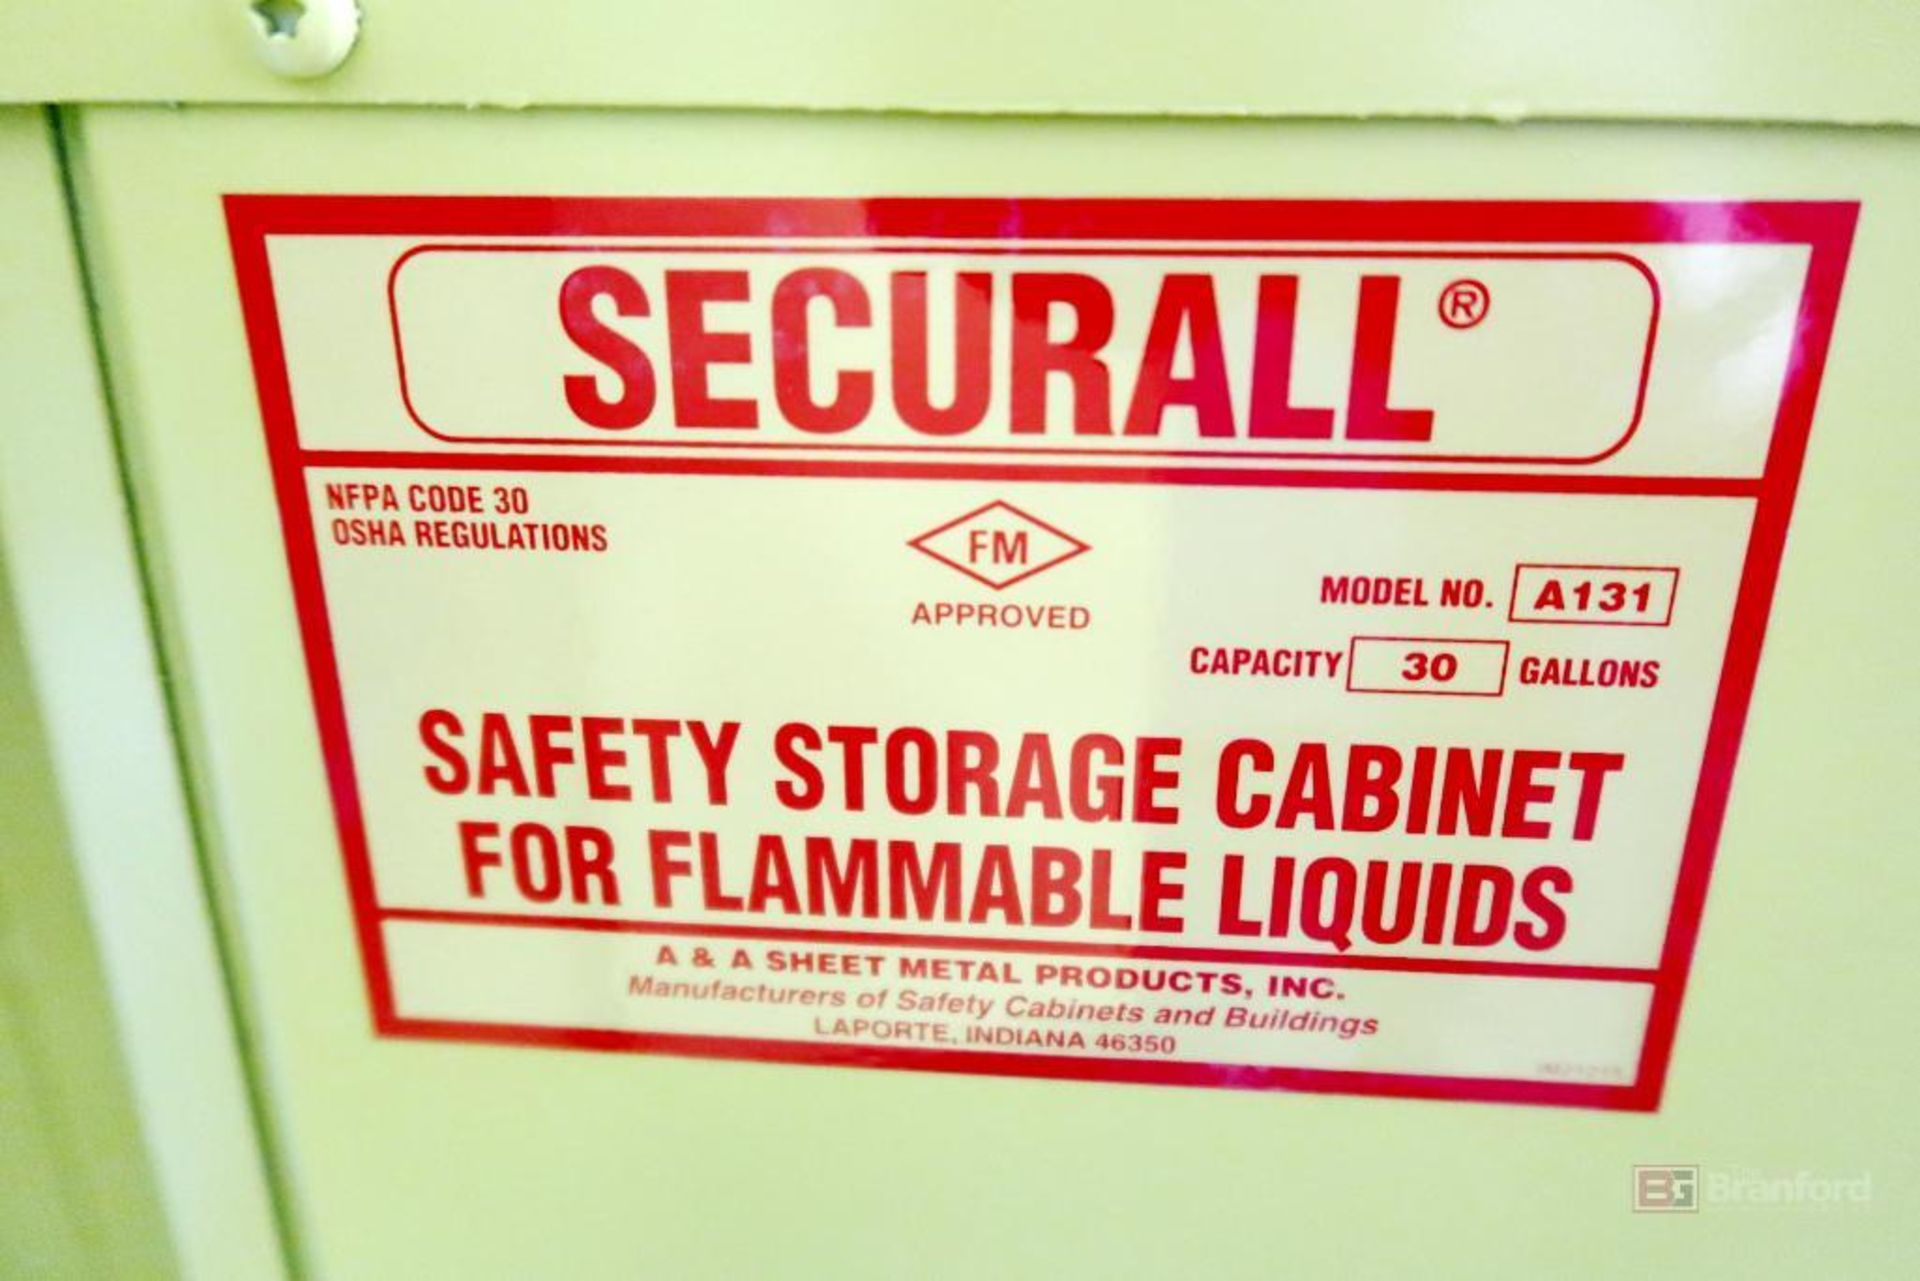 Securall Safety Storage Cabinet - Image 4 of 4